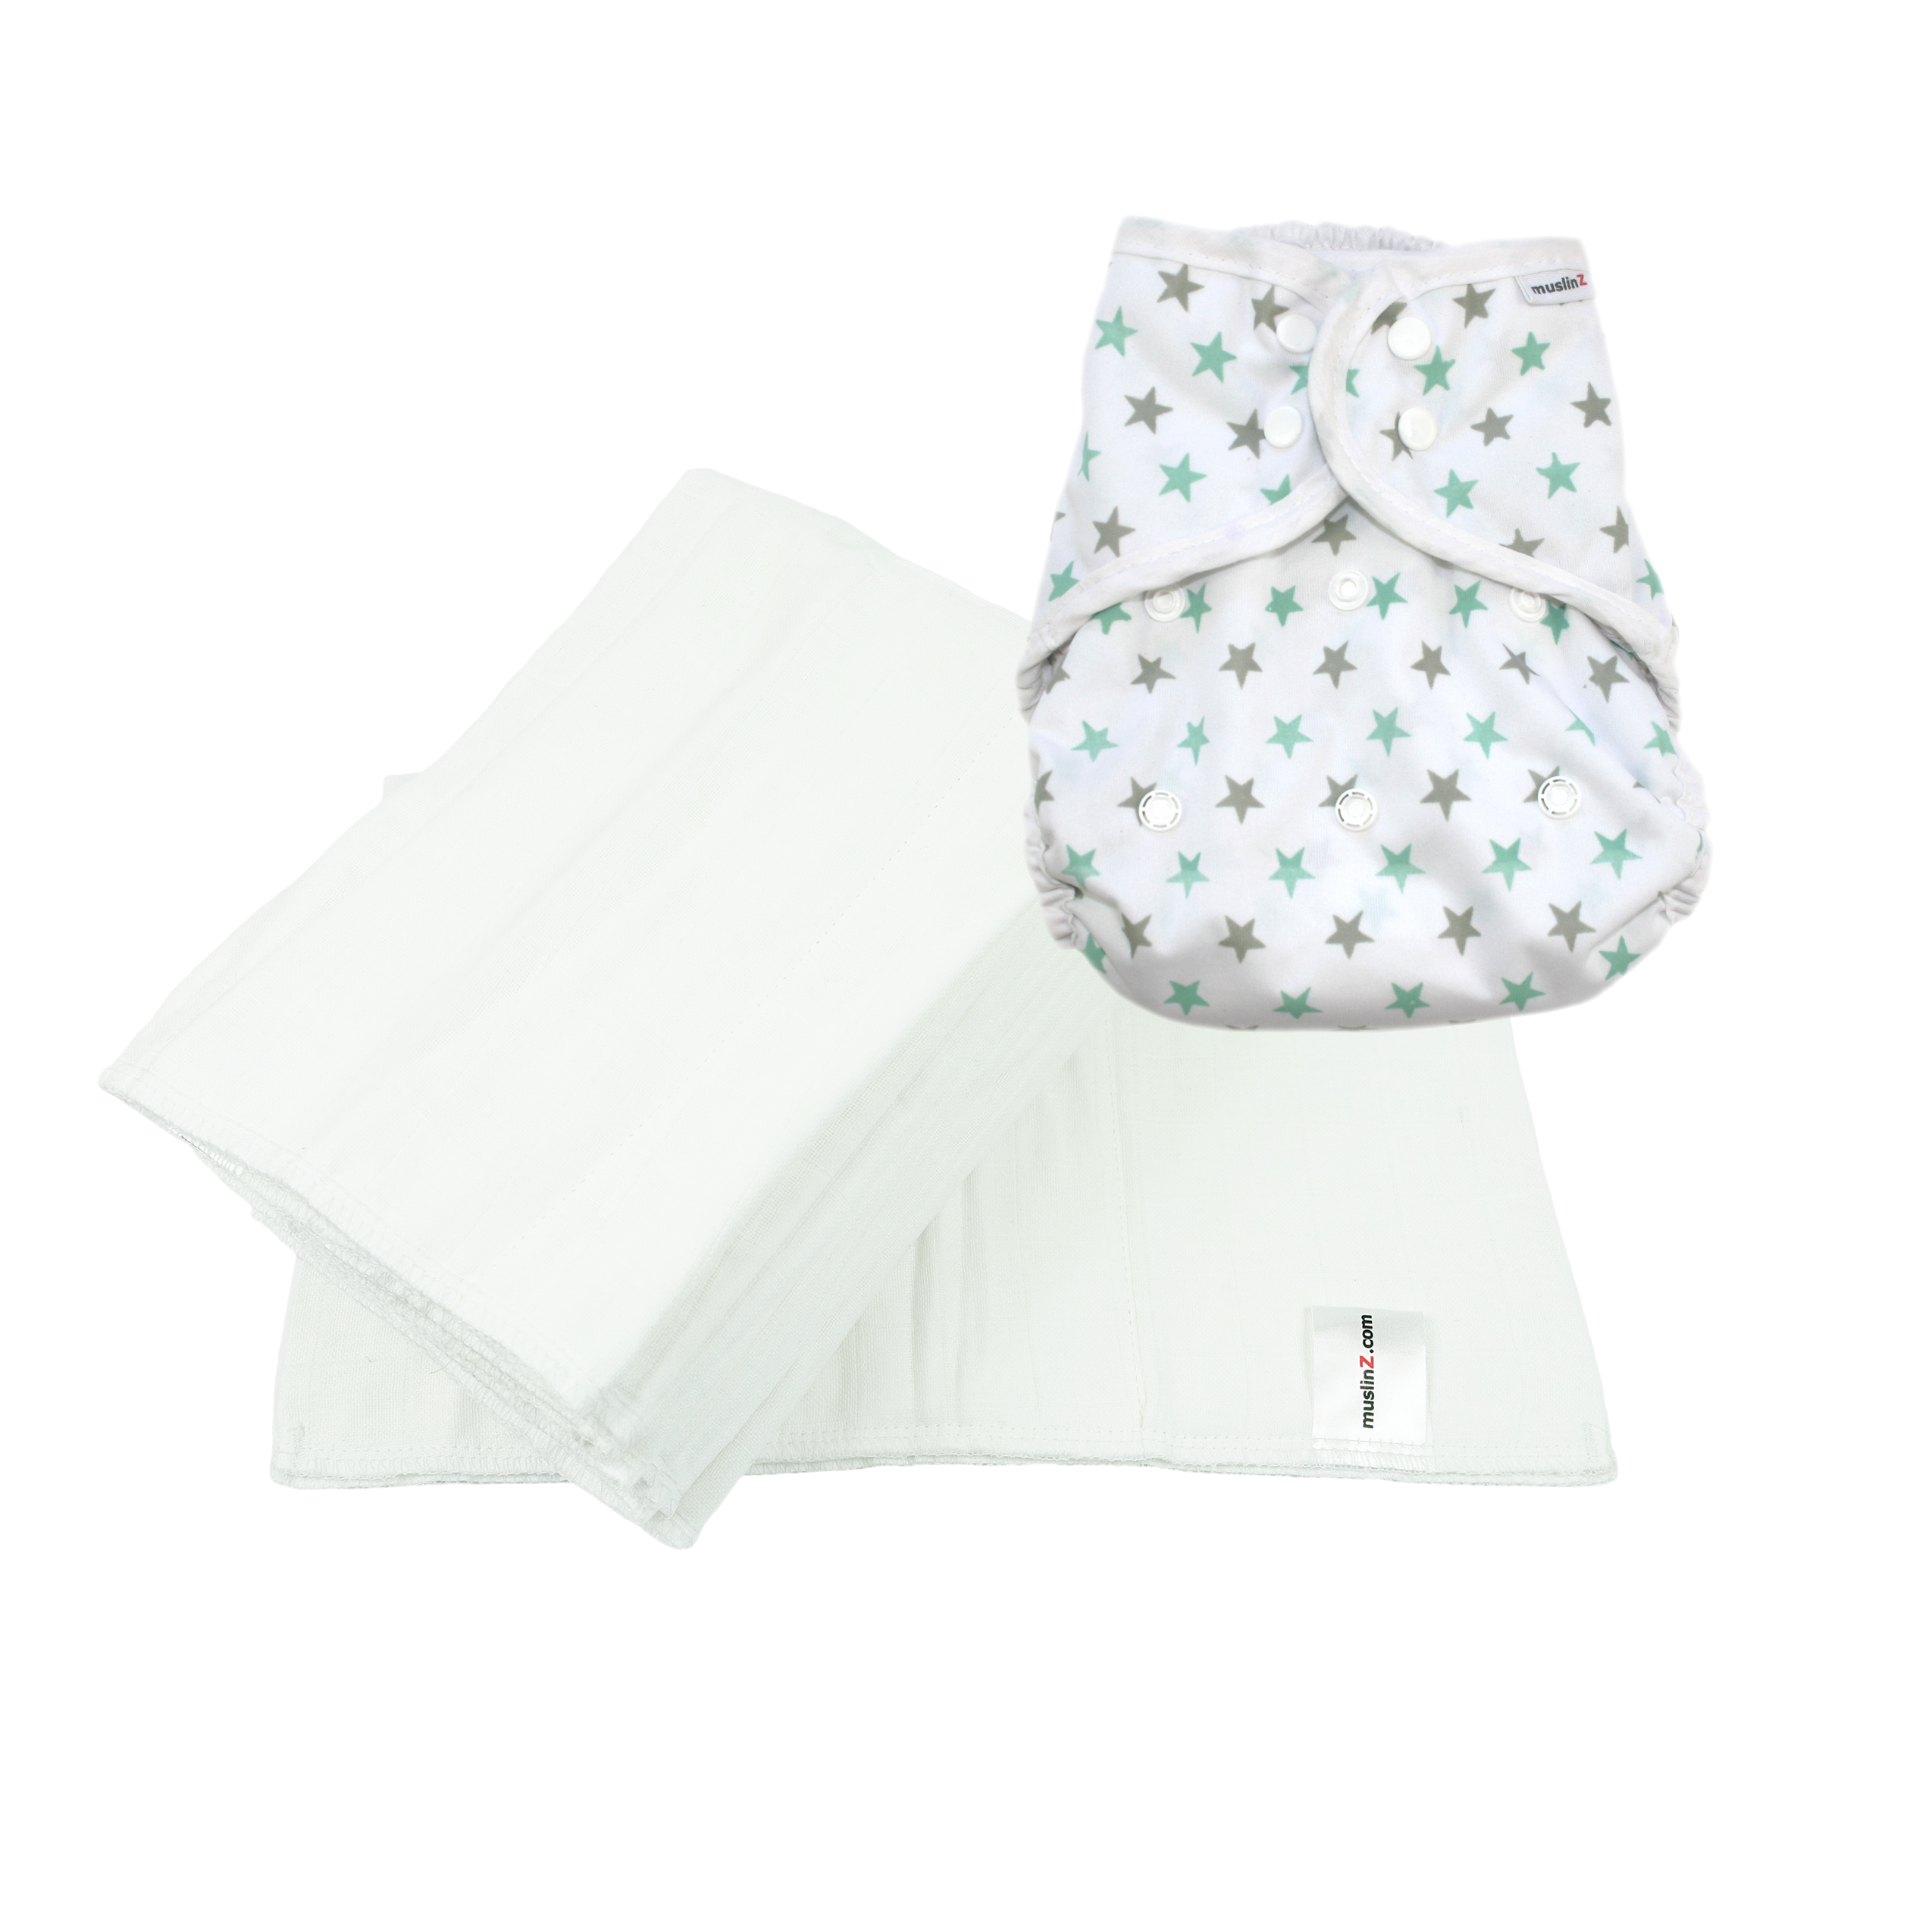 Size 2 Cover - Mint Star with 6pk White